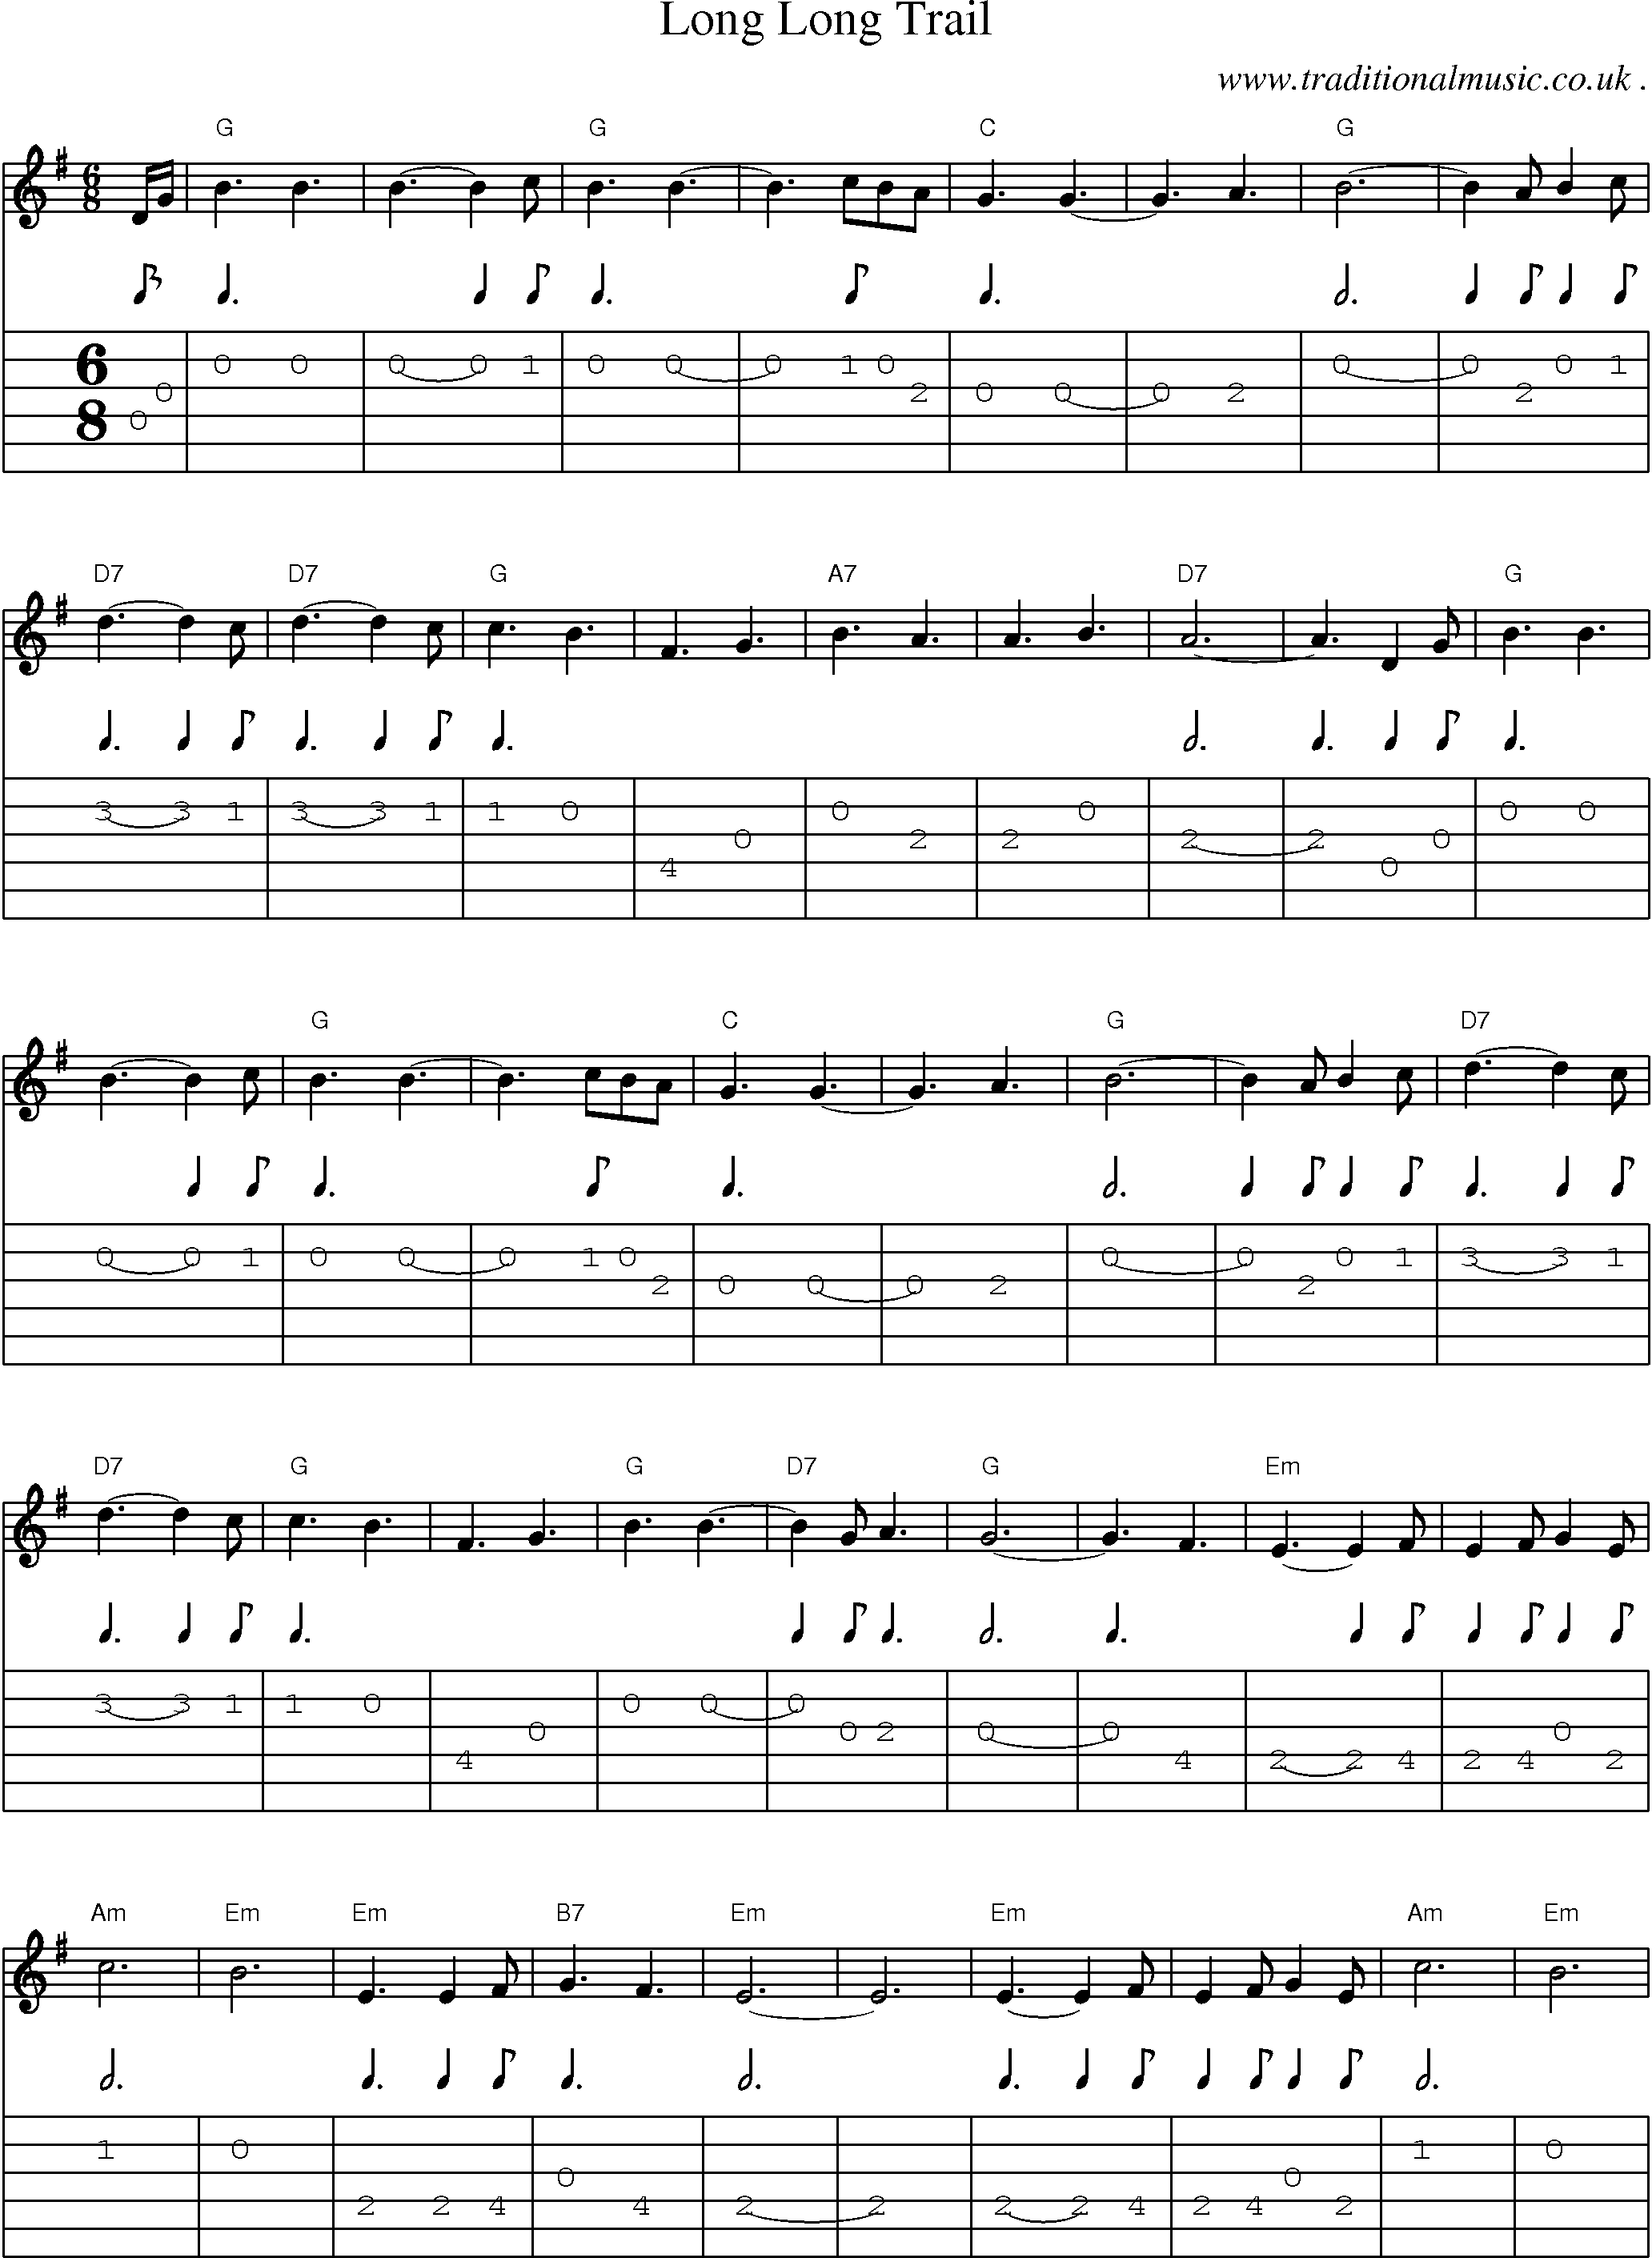 Sheet-Music and Guitar Tabs for Long Long Trail